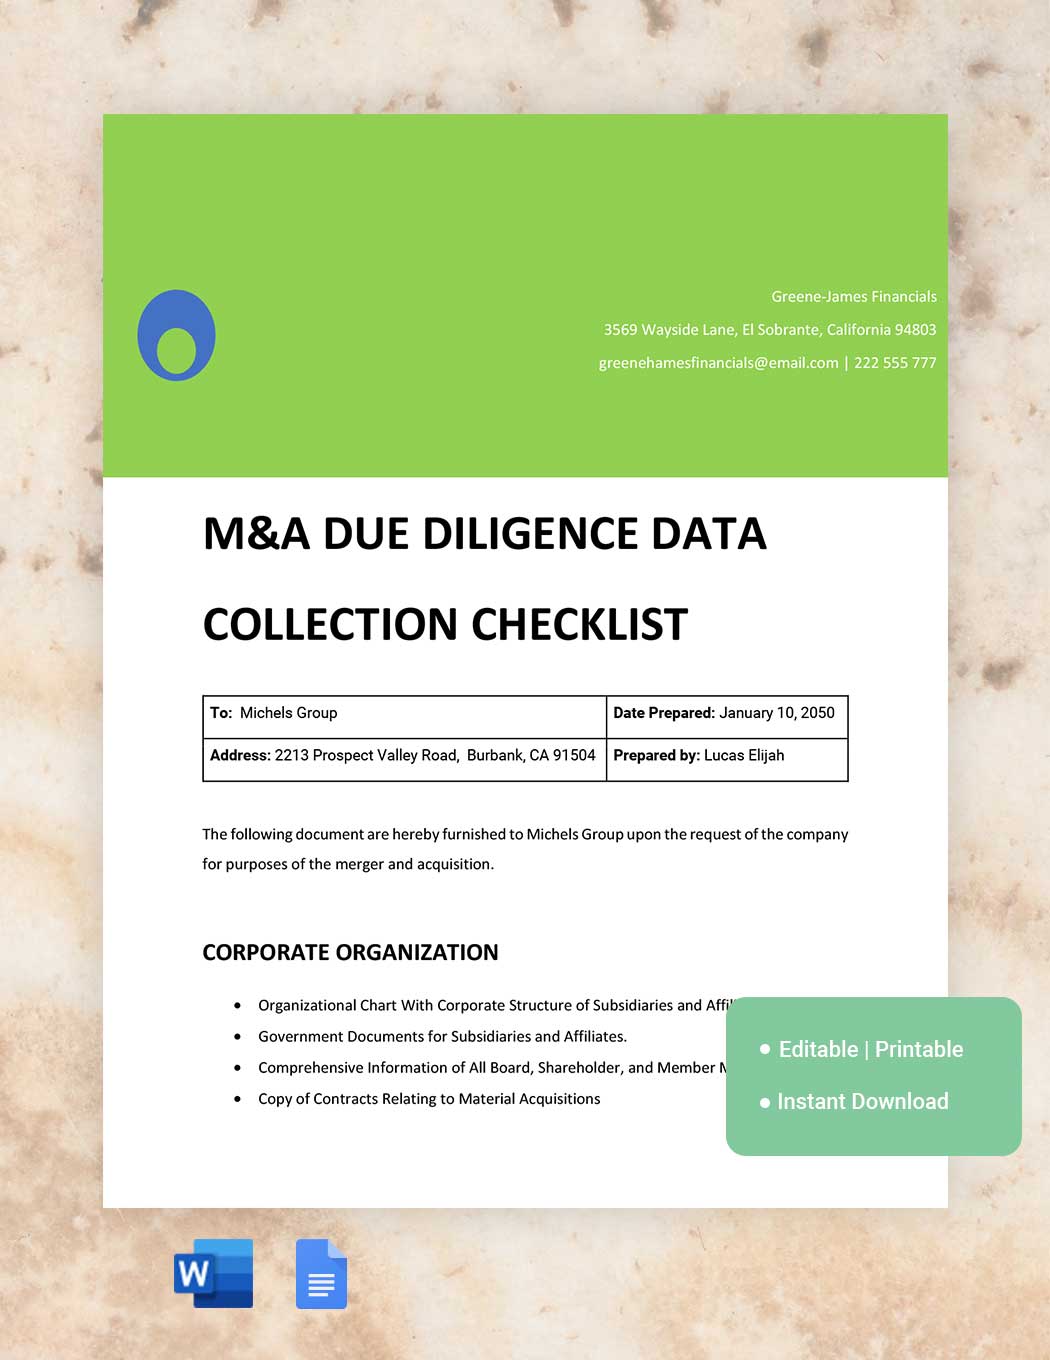 M&A Due Diligence Data Collection